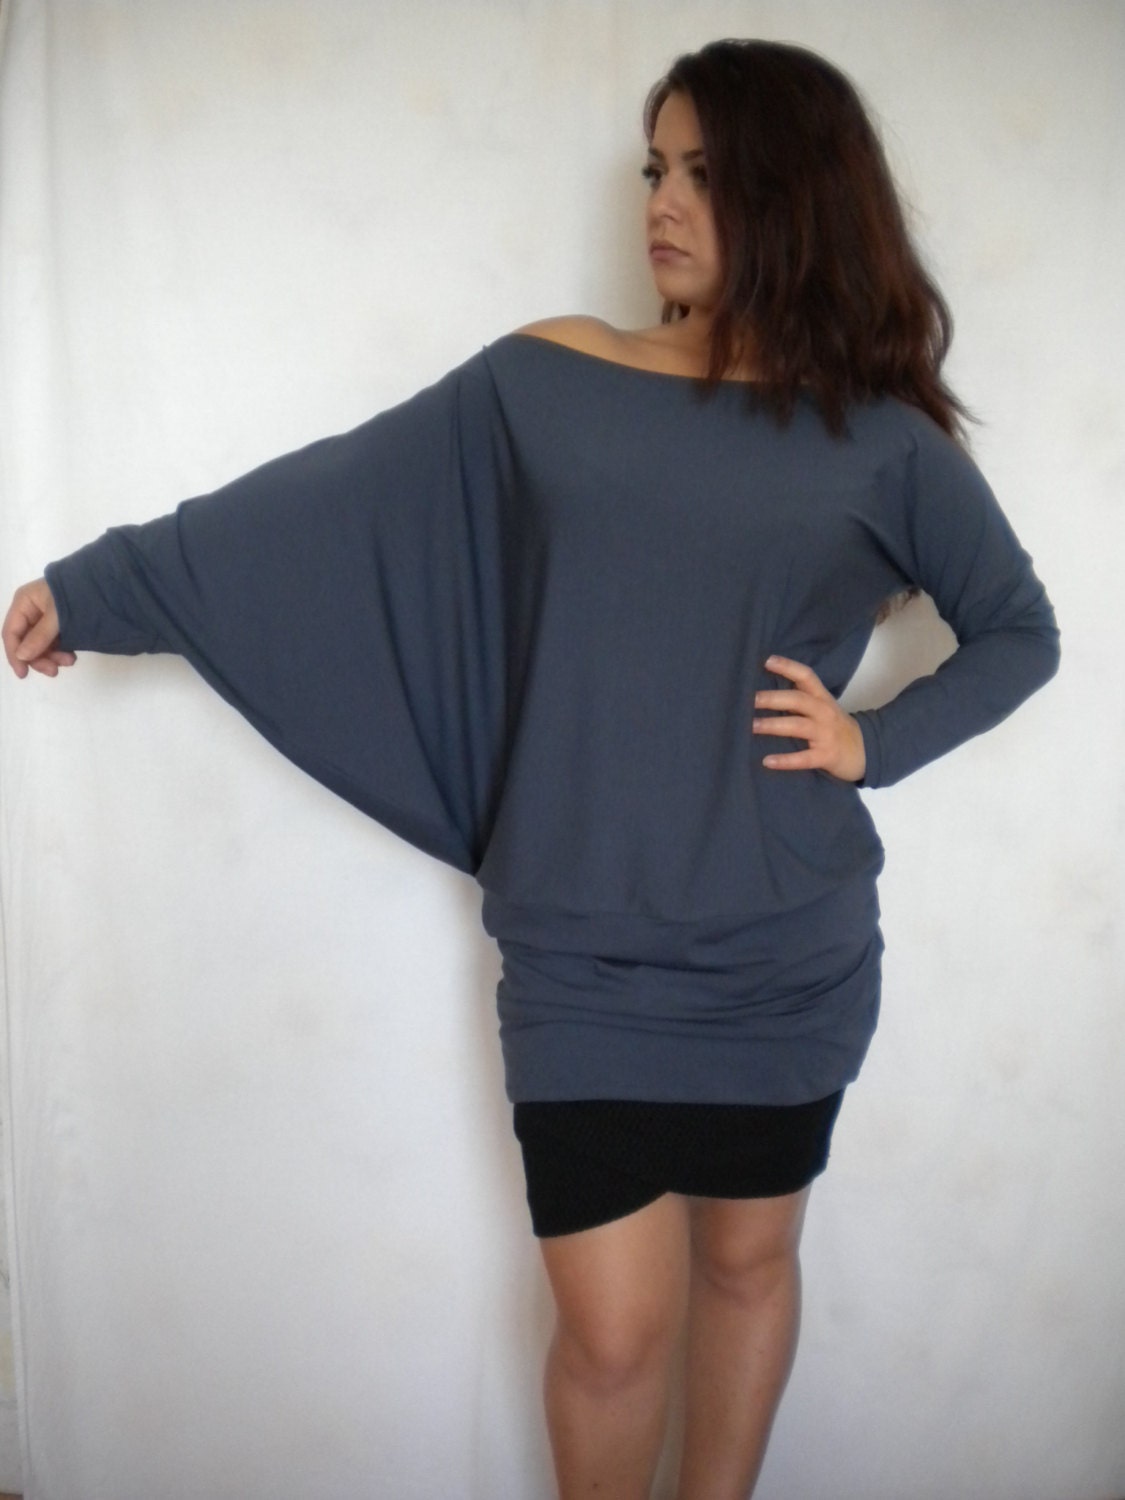 Plus Size off Shoulder Sweater, Asymmetric Batwing Sleeve Top ...